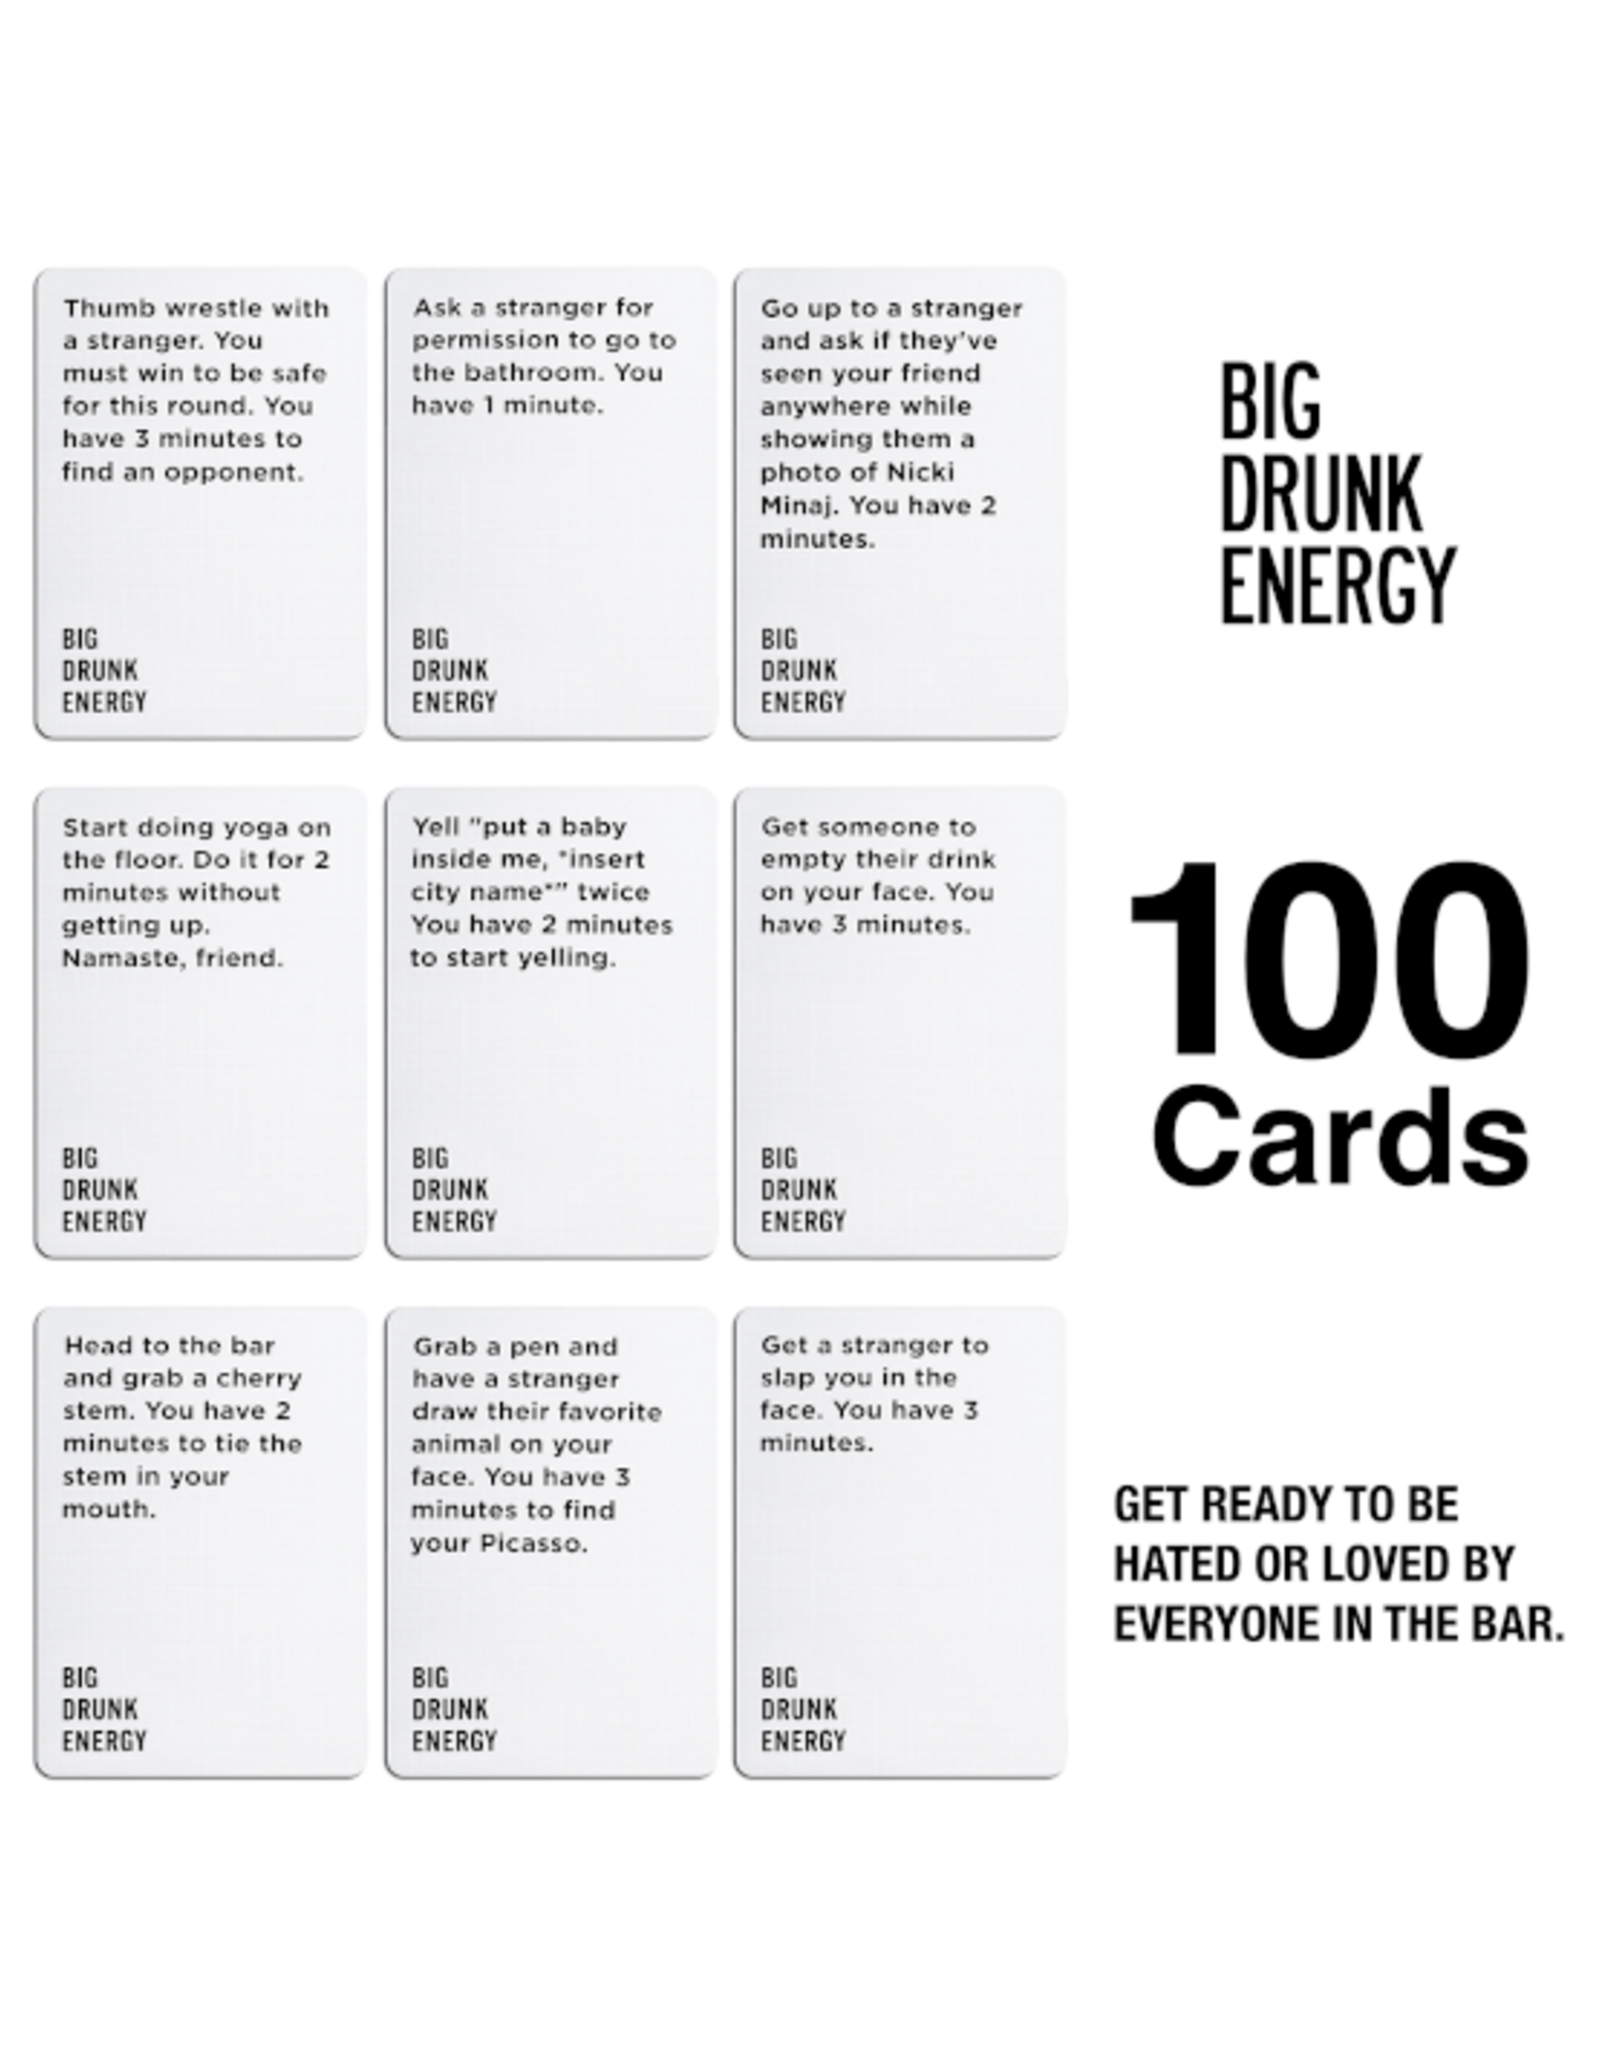 Do or Drink - Big Drunk Energy (White Box)(21+, Adult)